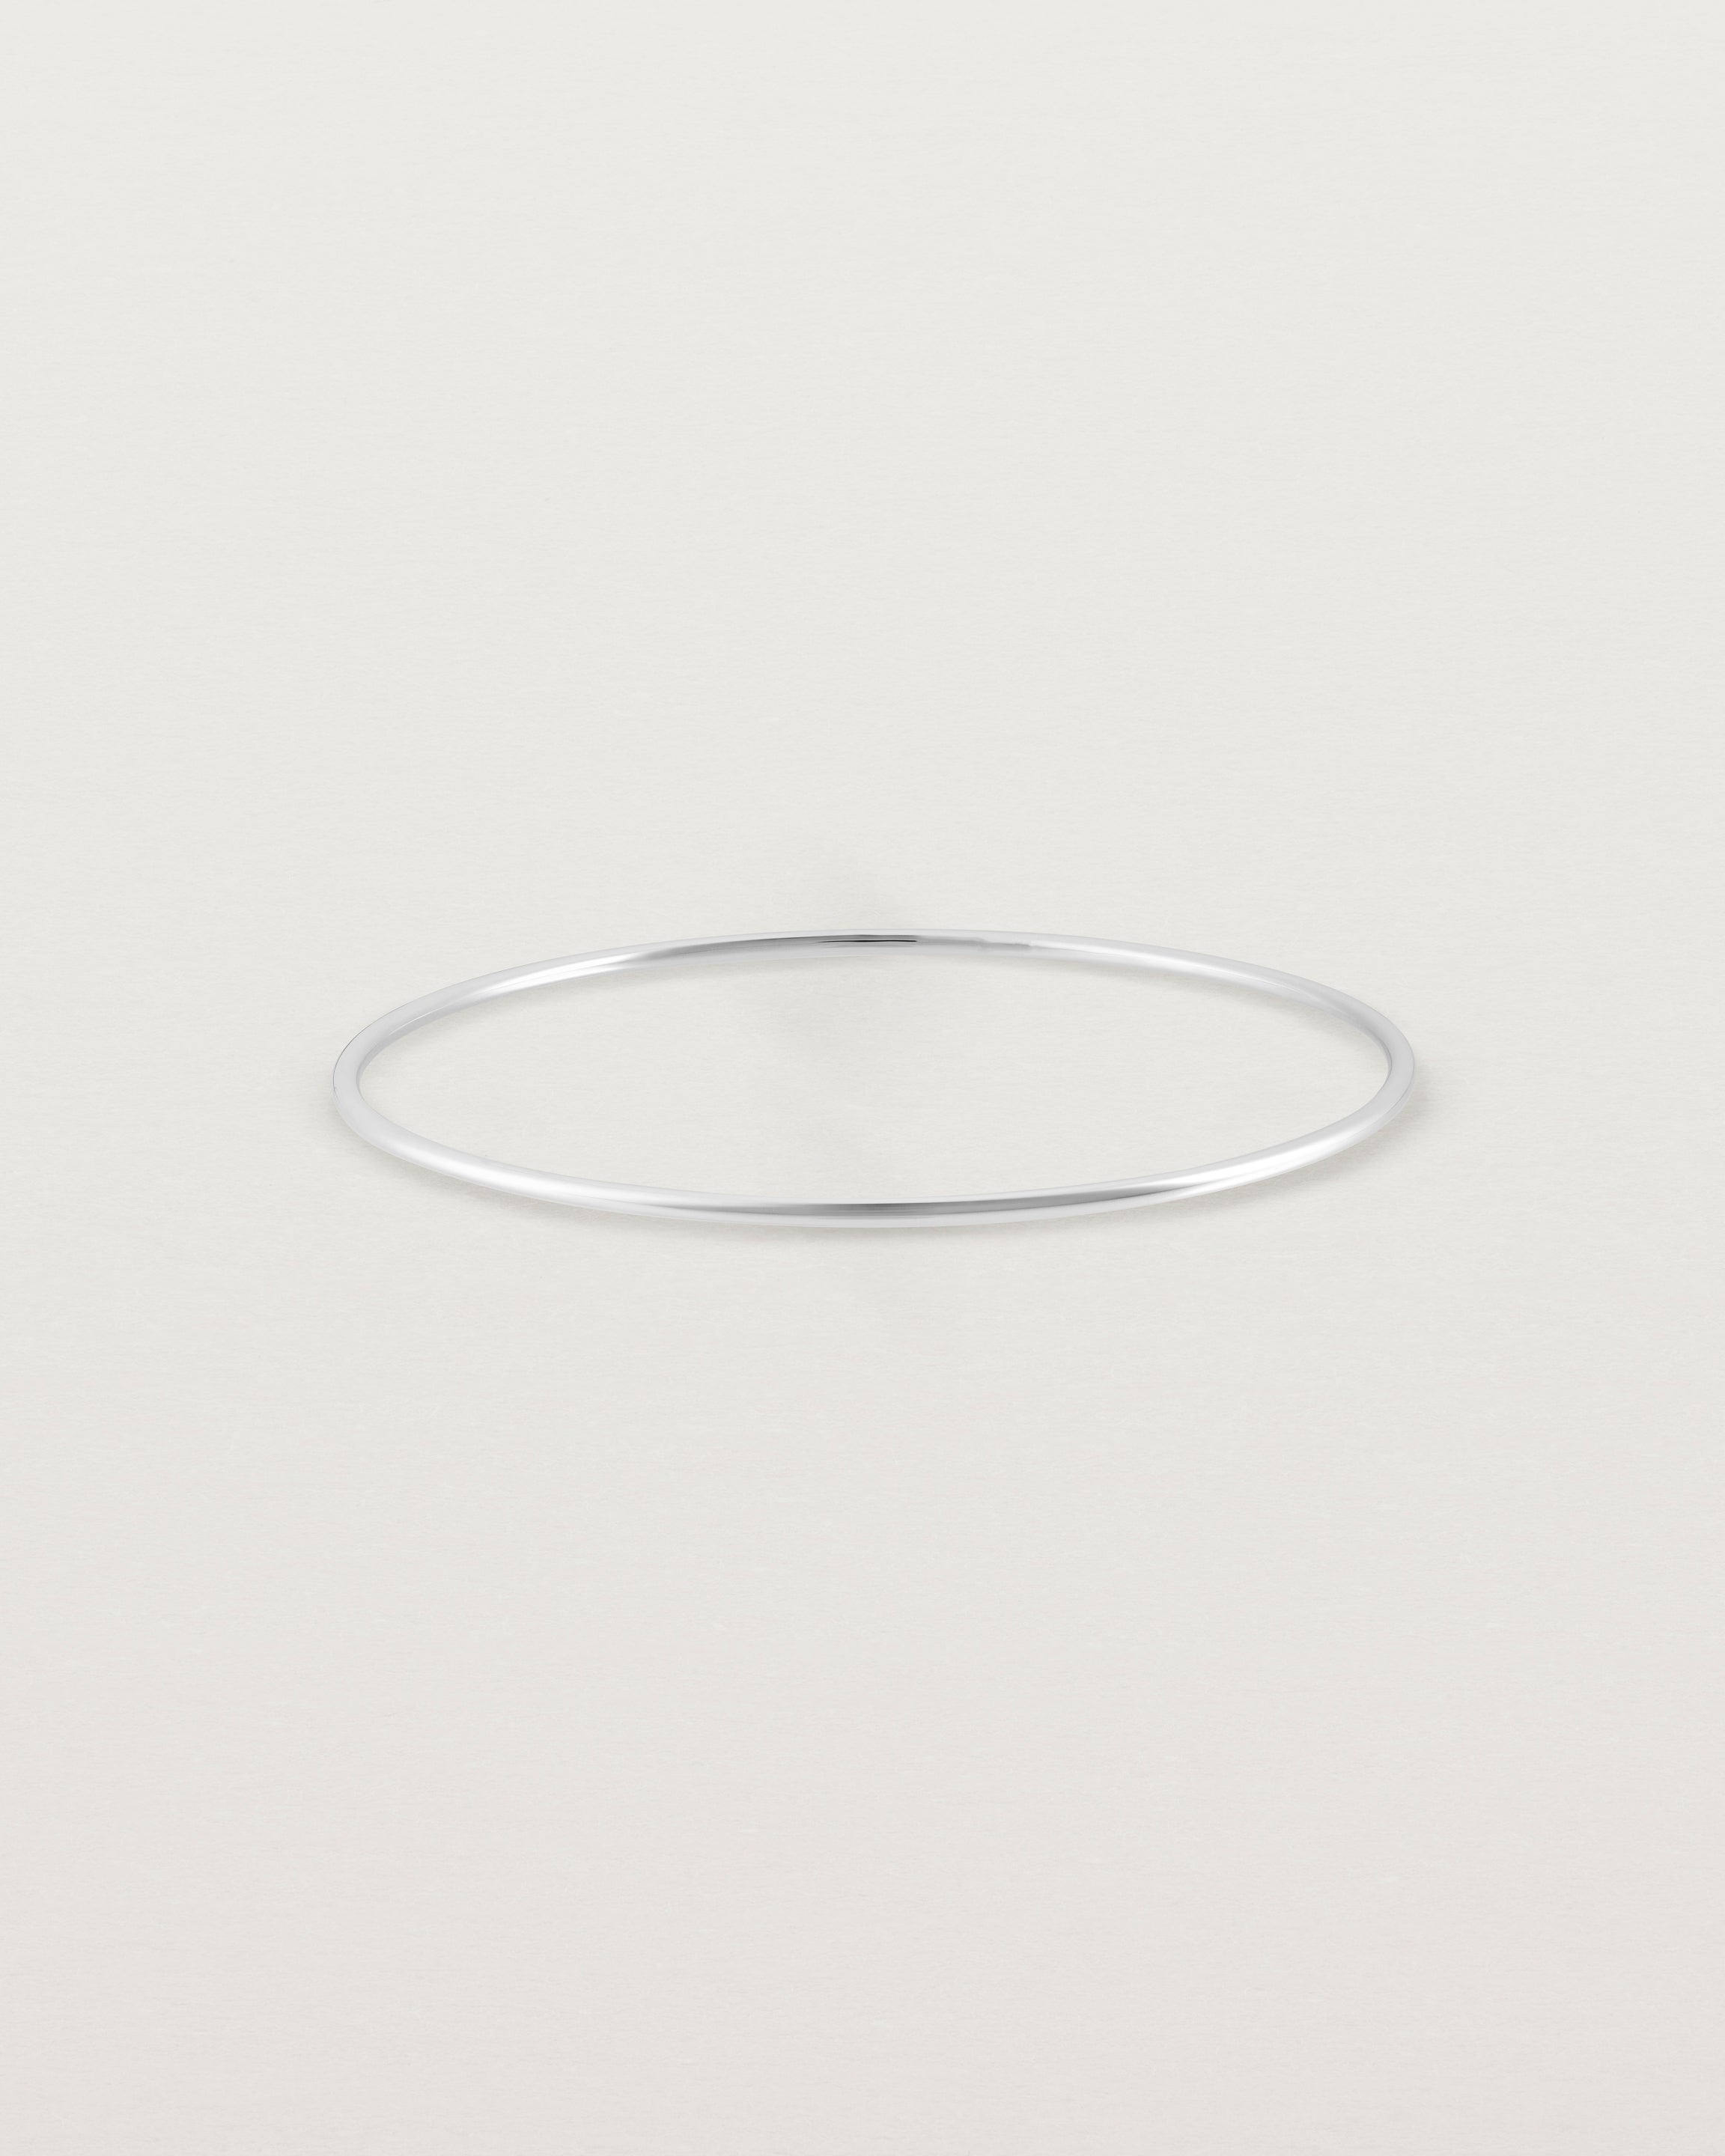 Front view of the Oval Bangle in White Gold.